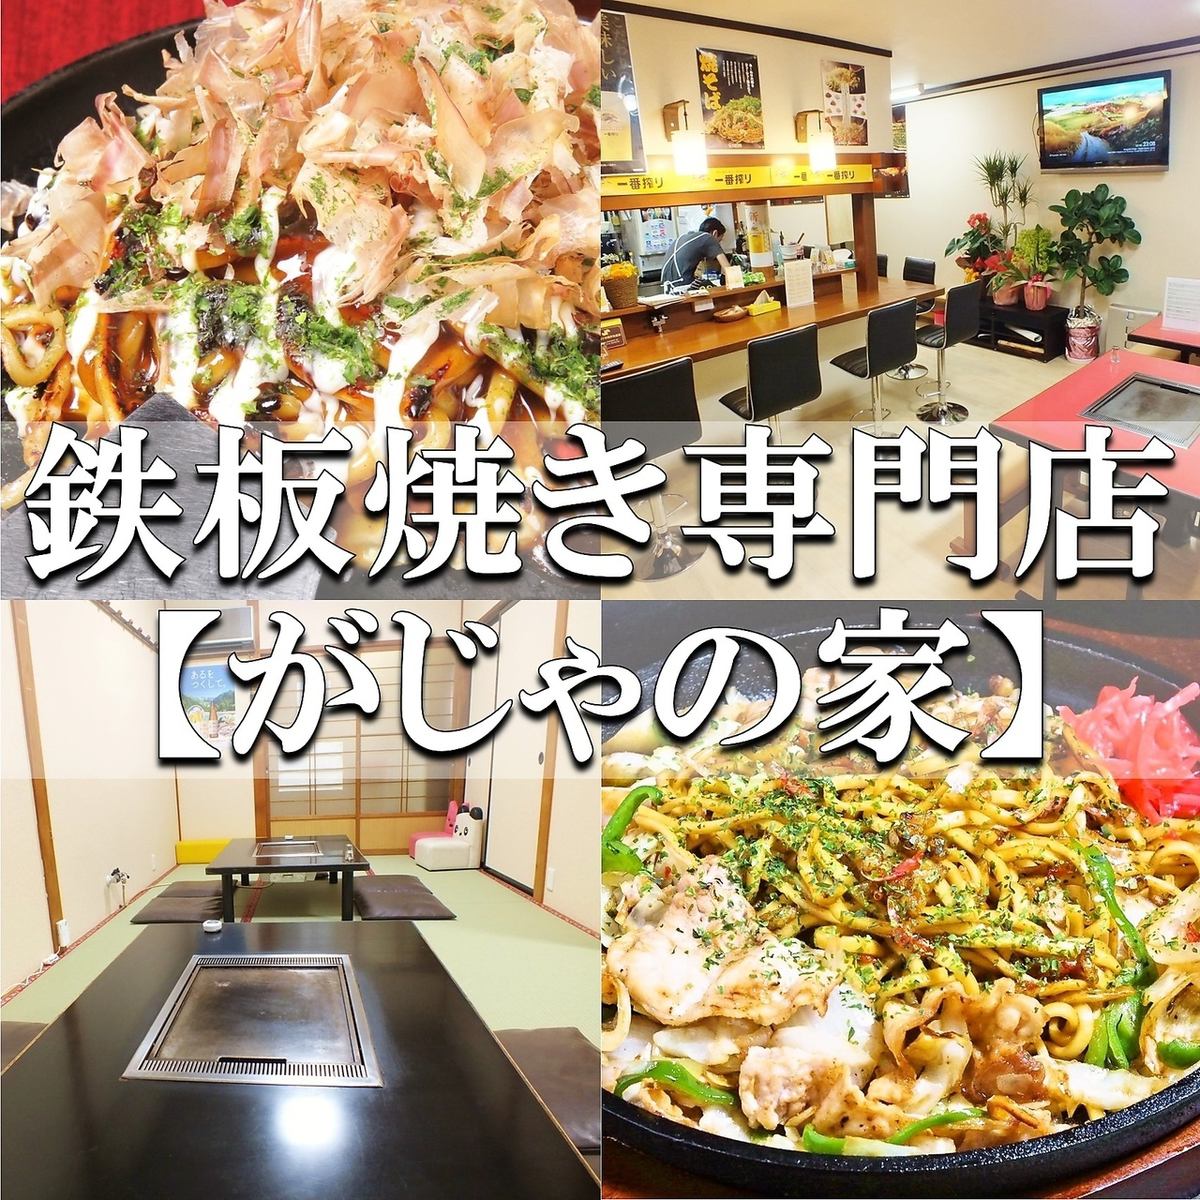 A cheerful teppanyaki specialty store! Popular Meita Mochi Cheese ☆ A private room with a tatami room for banquets!